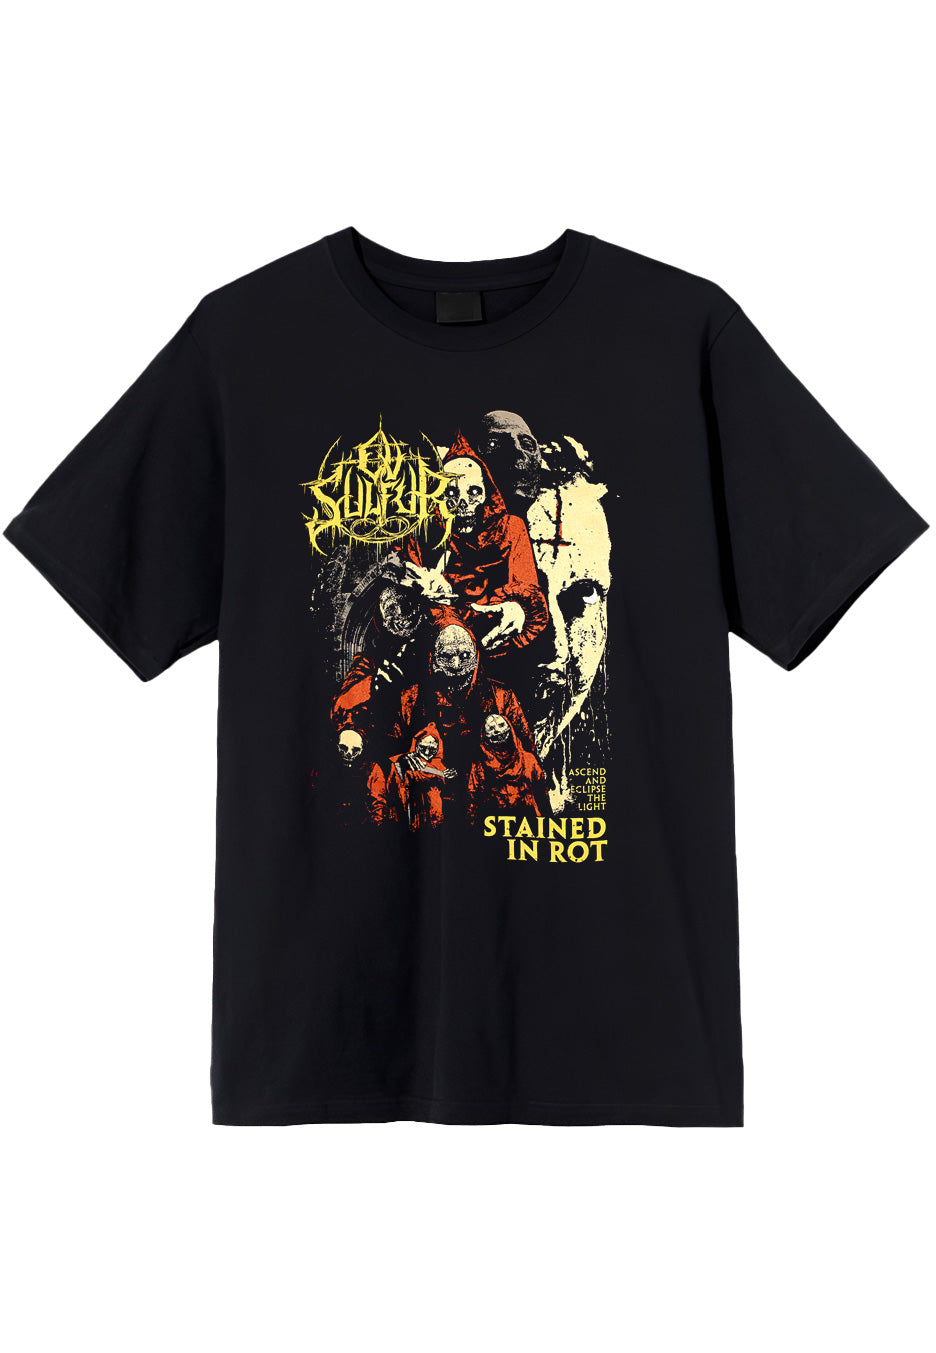 Ov Sulfur - Stained In Rot - T-Shirt